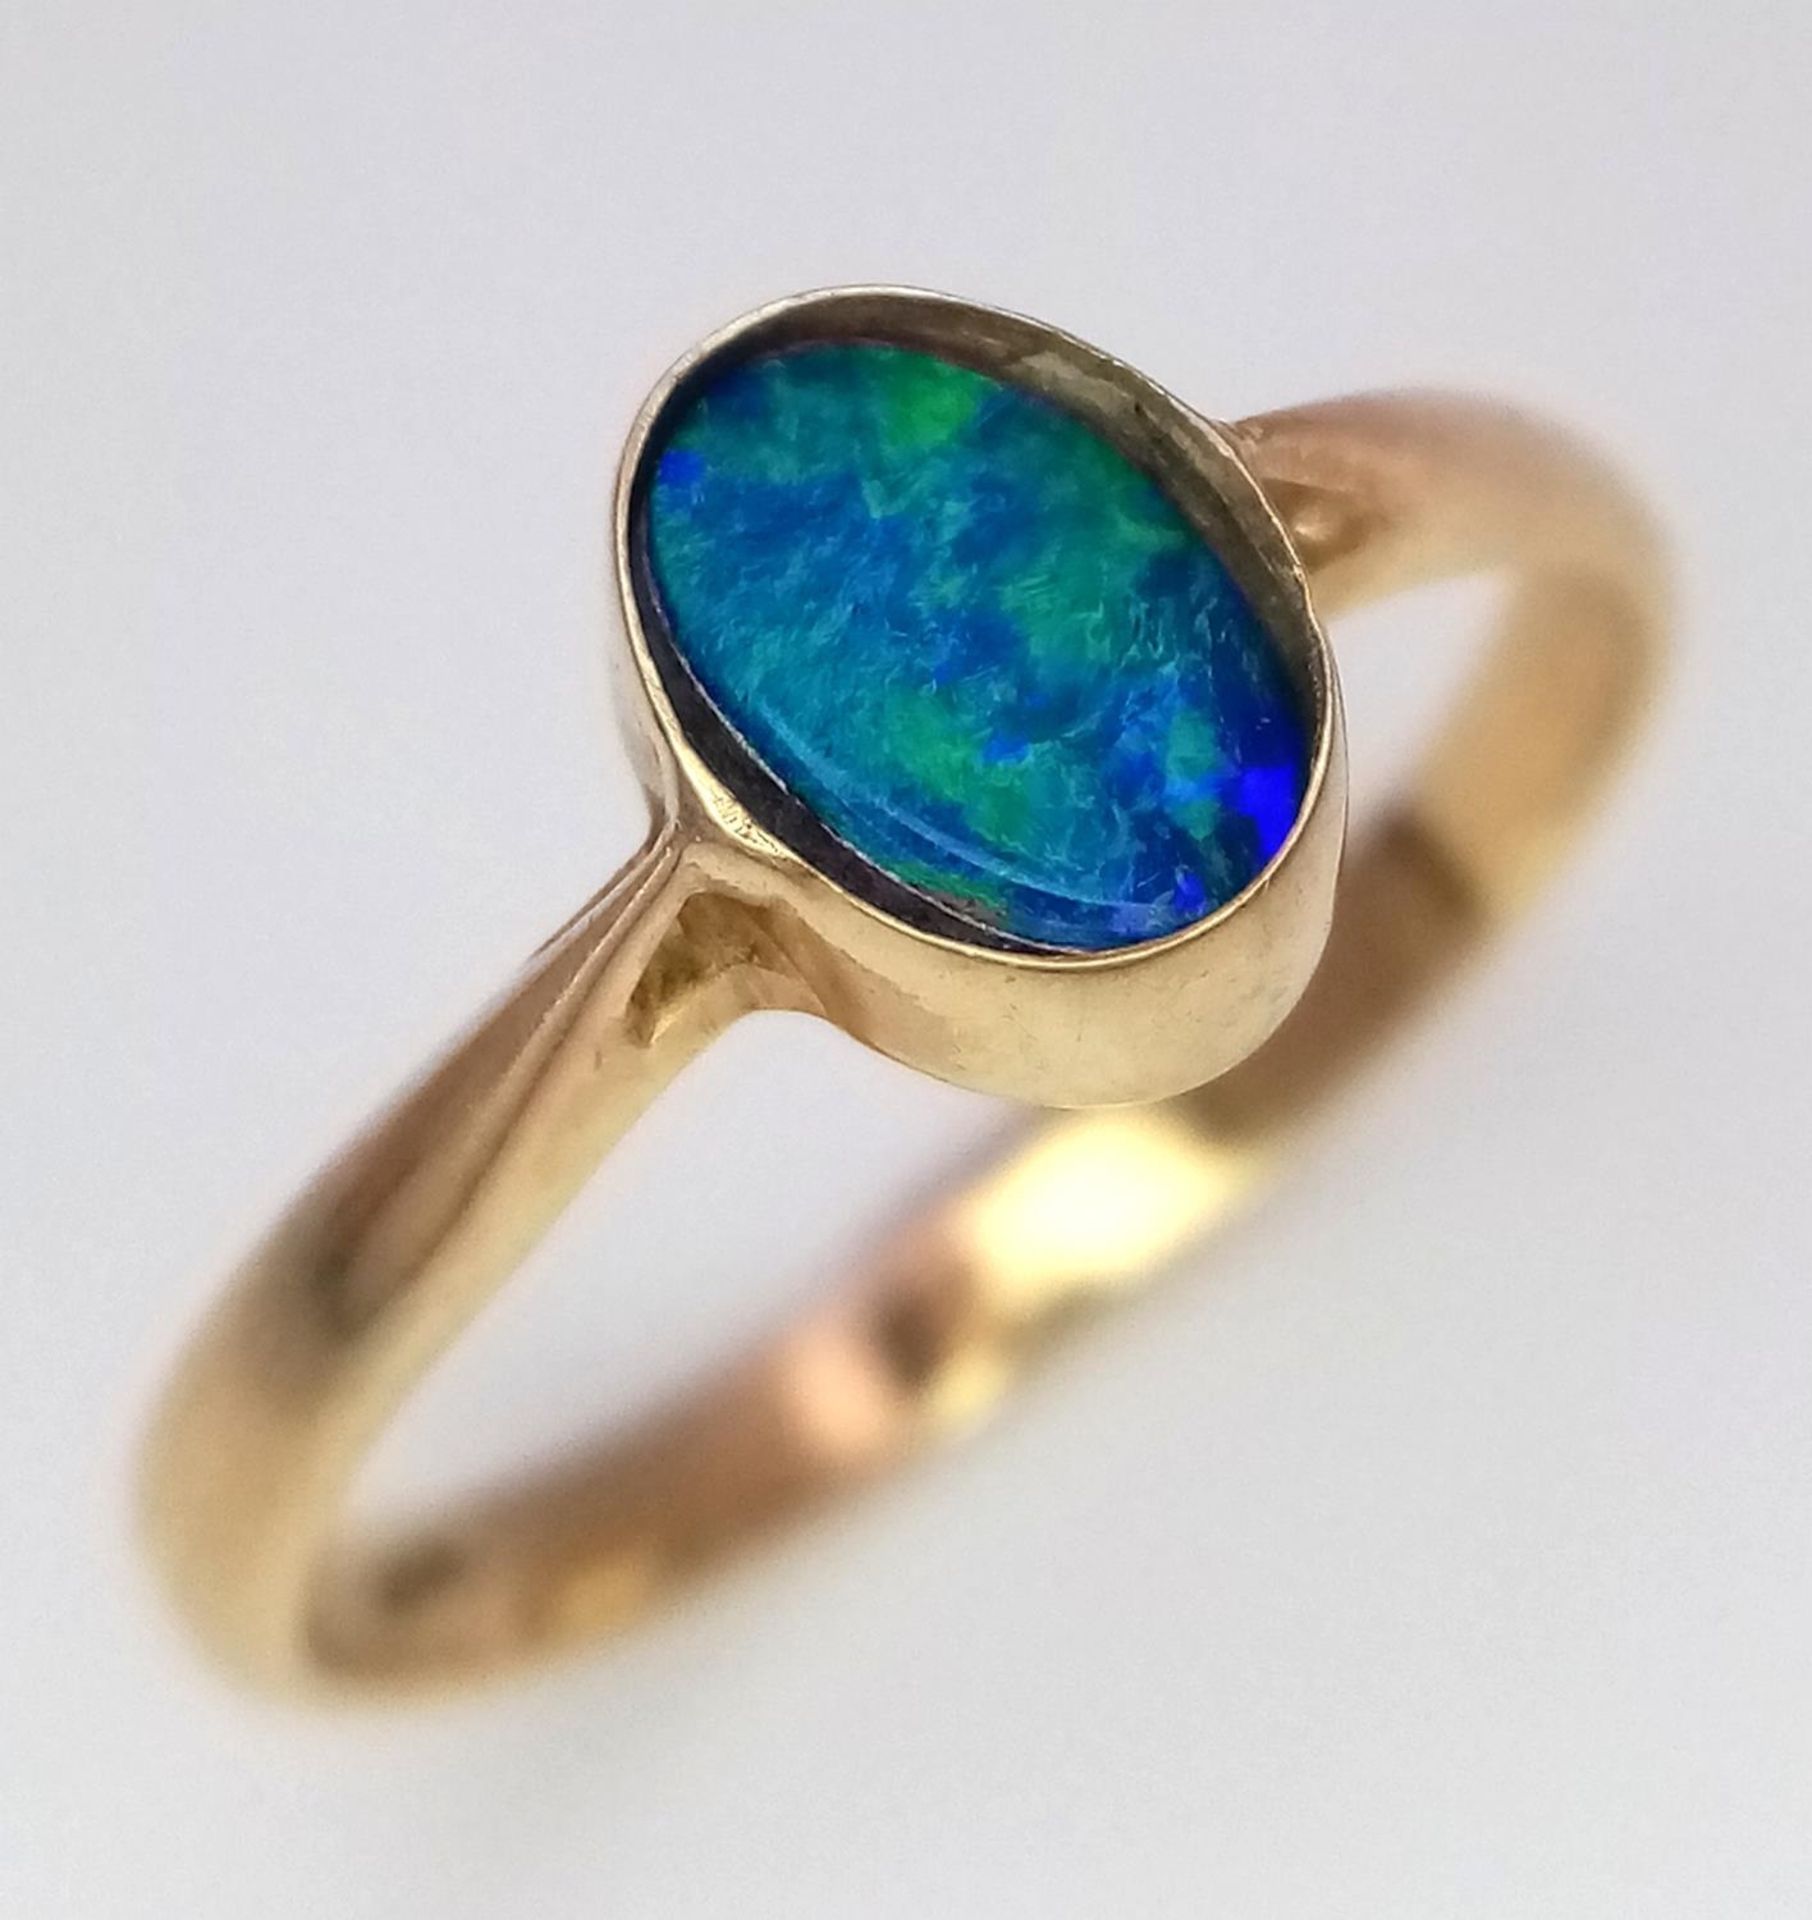 A 14K (TESTED) YELLOW GOLD DOUBLET OPAL RING. Size K, 1.4g total weight. Ref: SC 9033 - Image 3 of 5